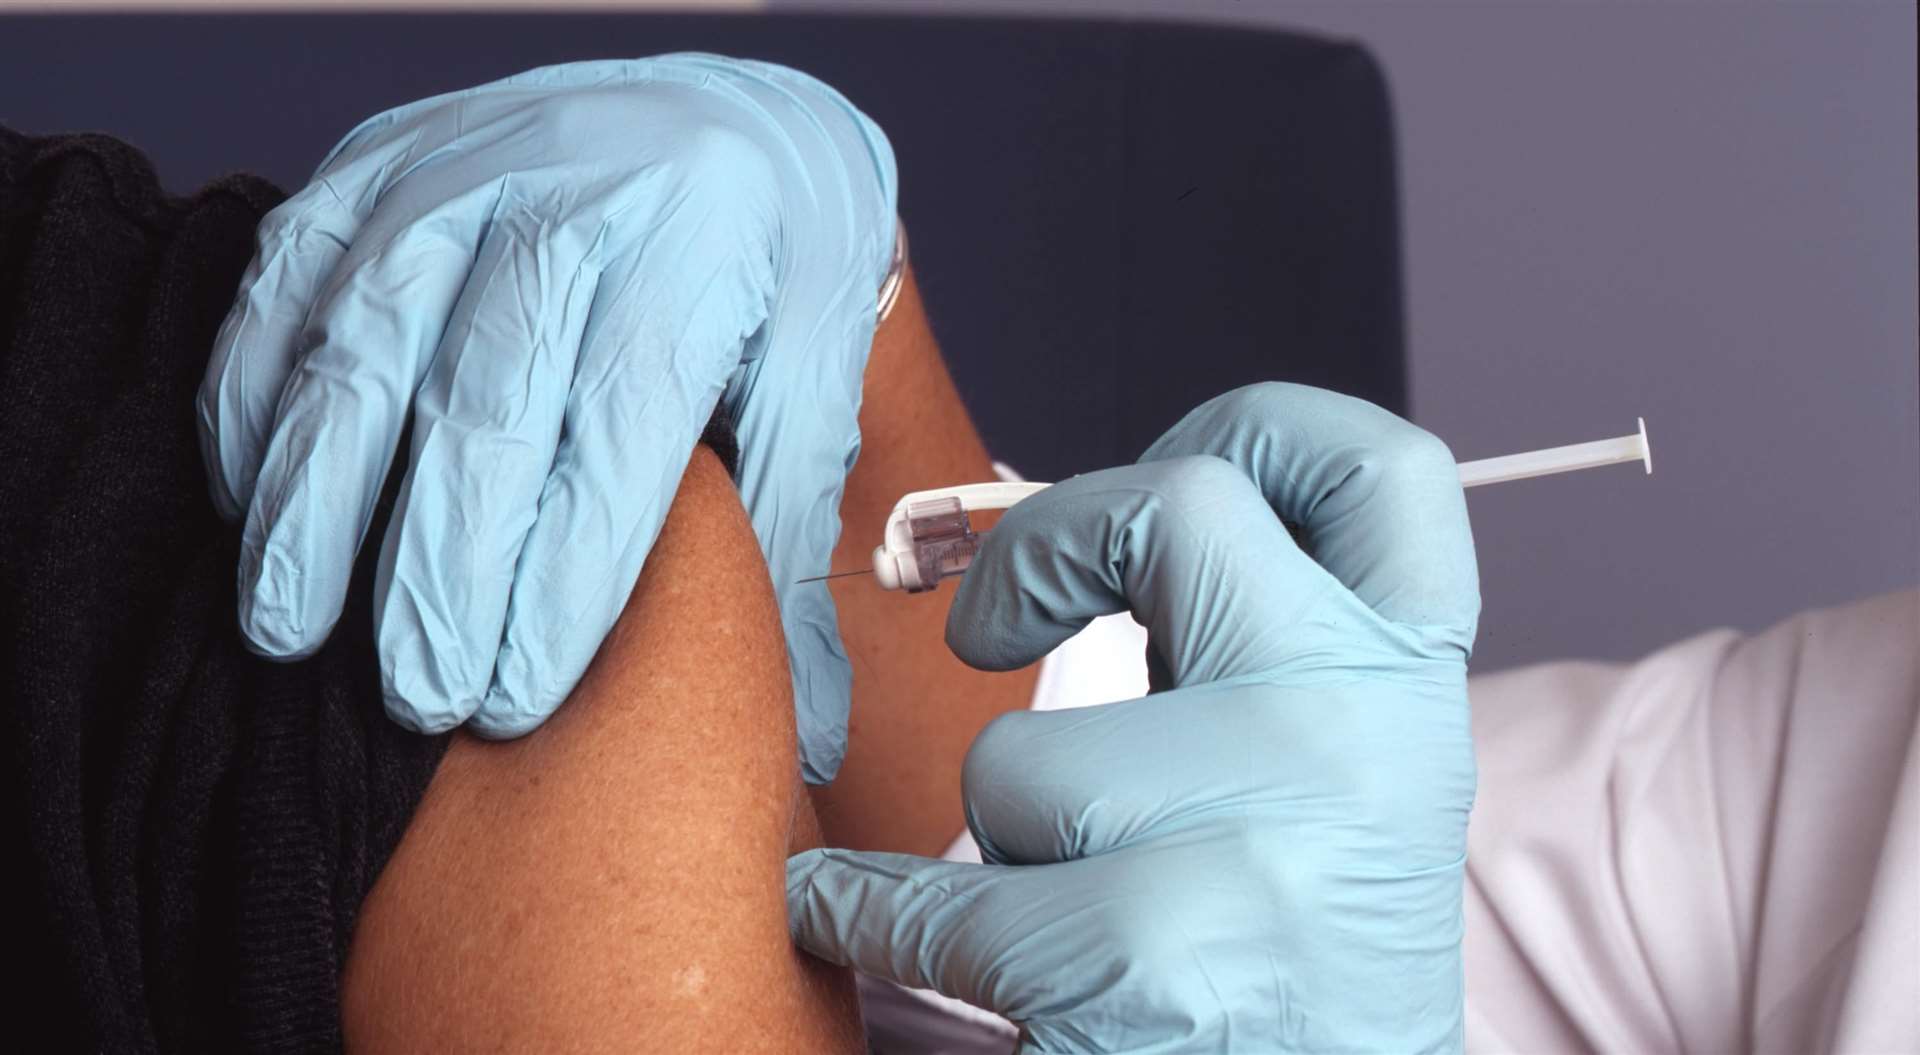 You can now get a dose of the COVID-19 vaccine from a walk-in site without an appointment.